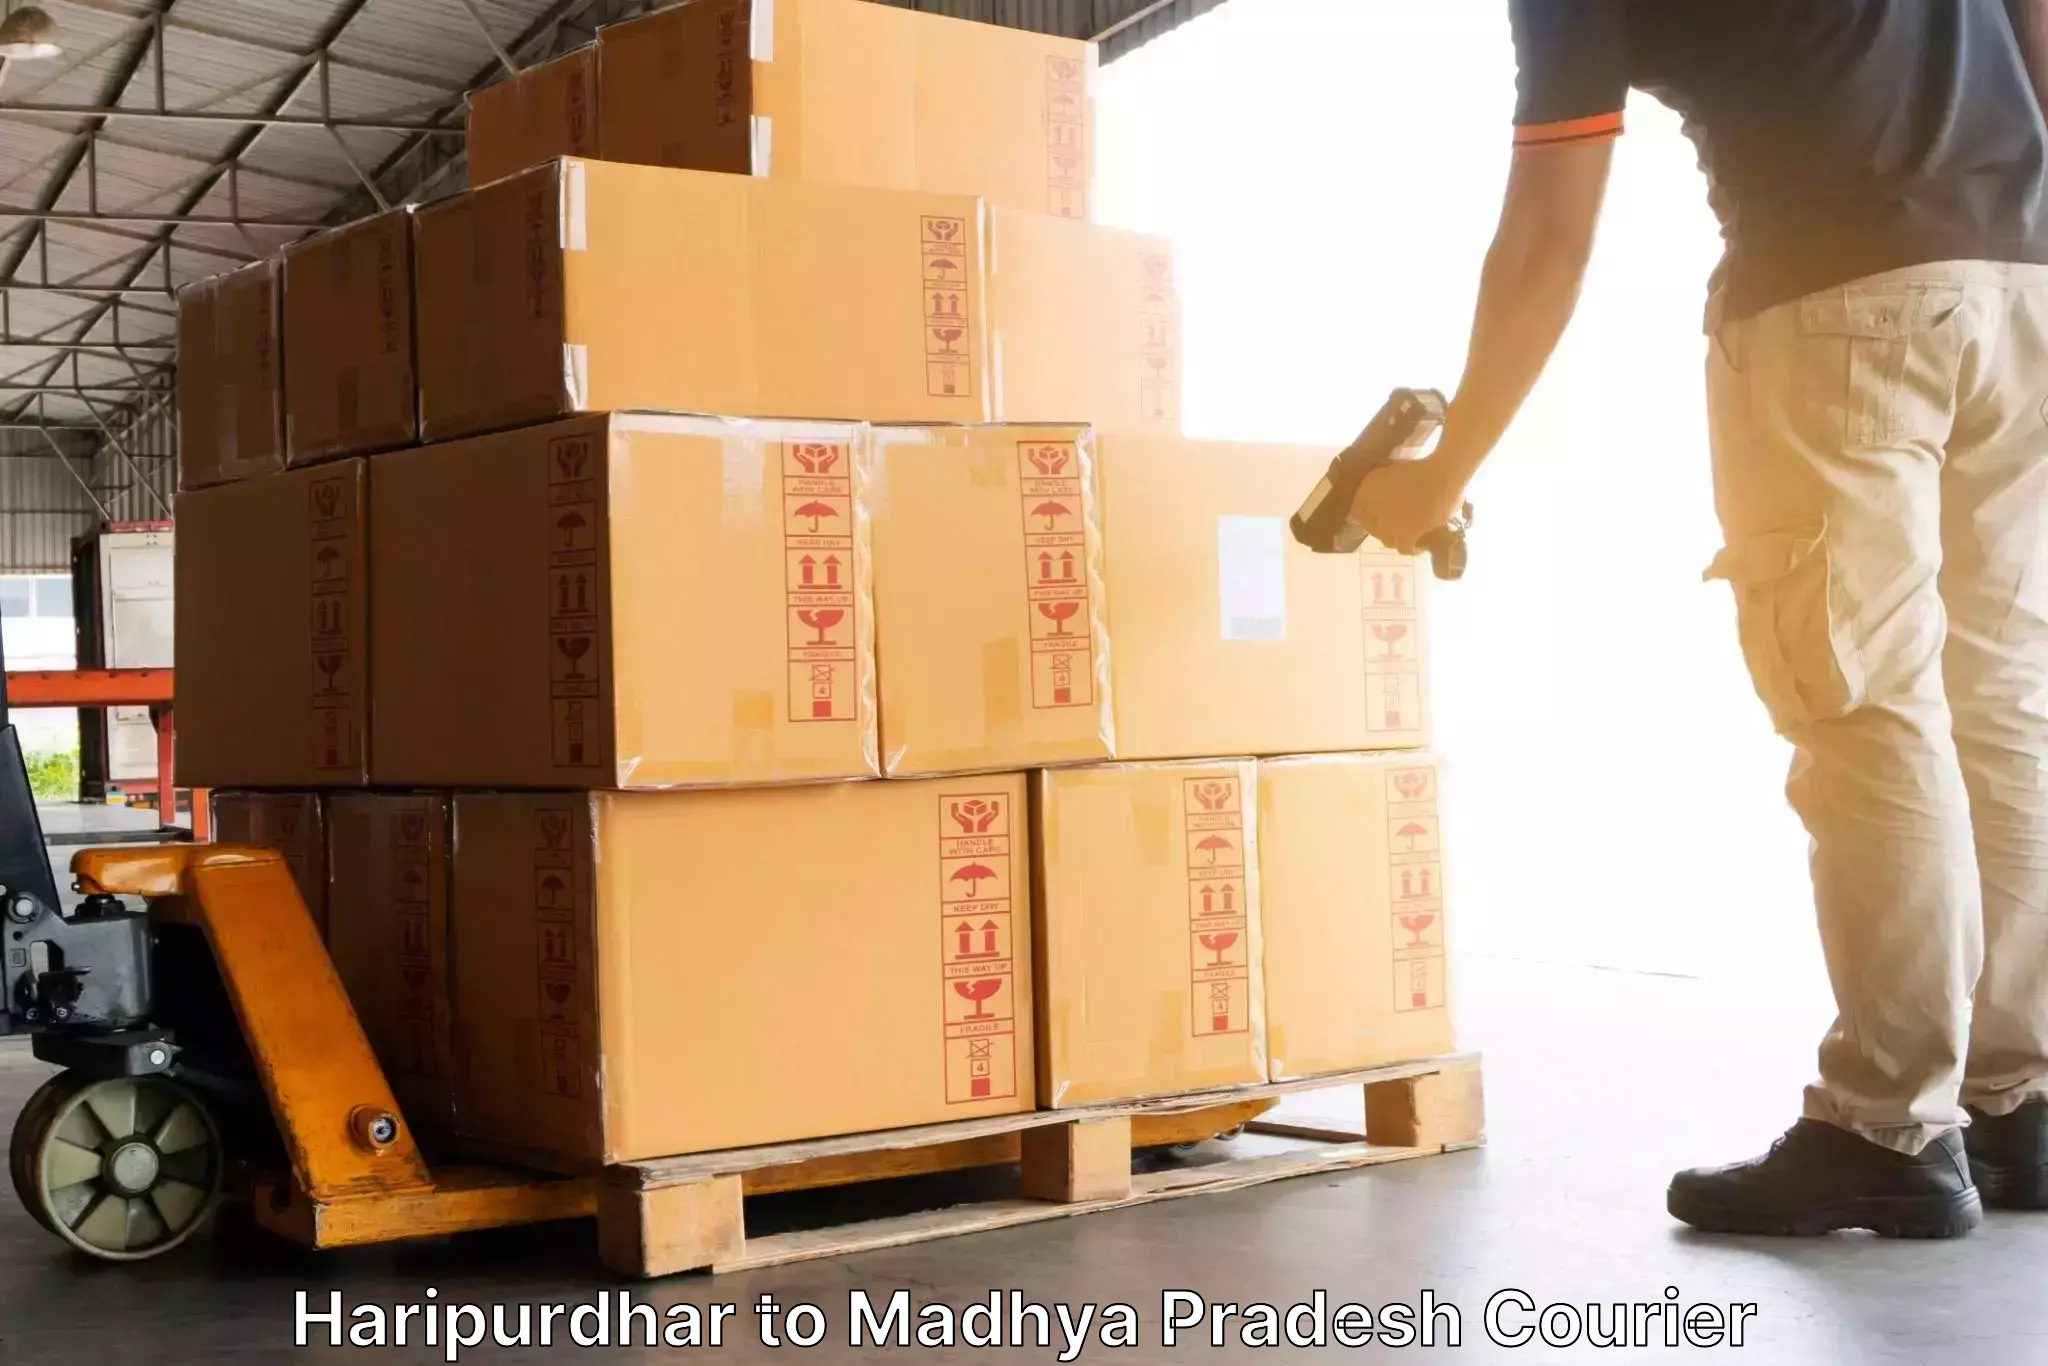 Courier dispatch services in Haripurdhar to Madhya Pradesh